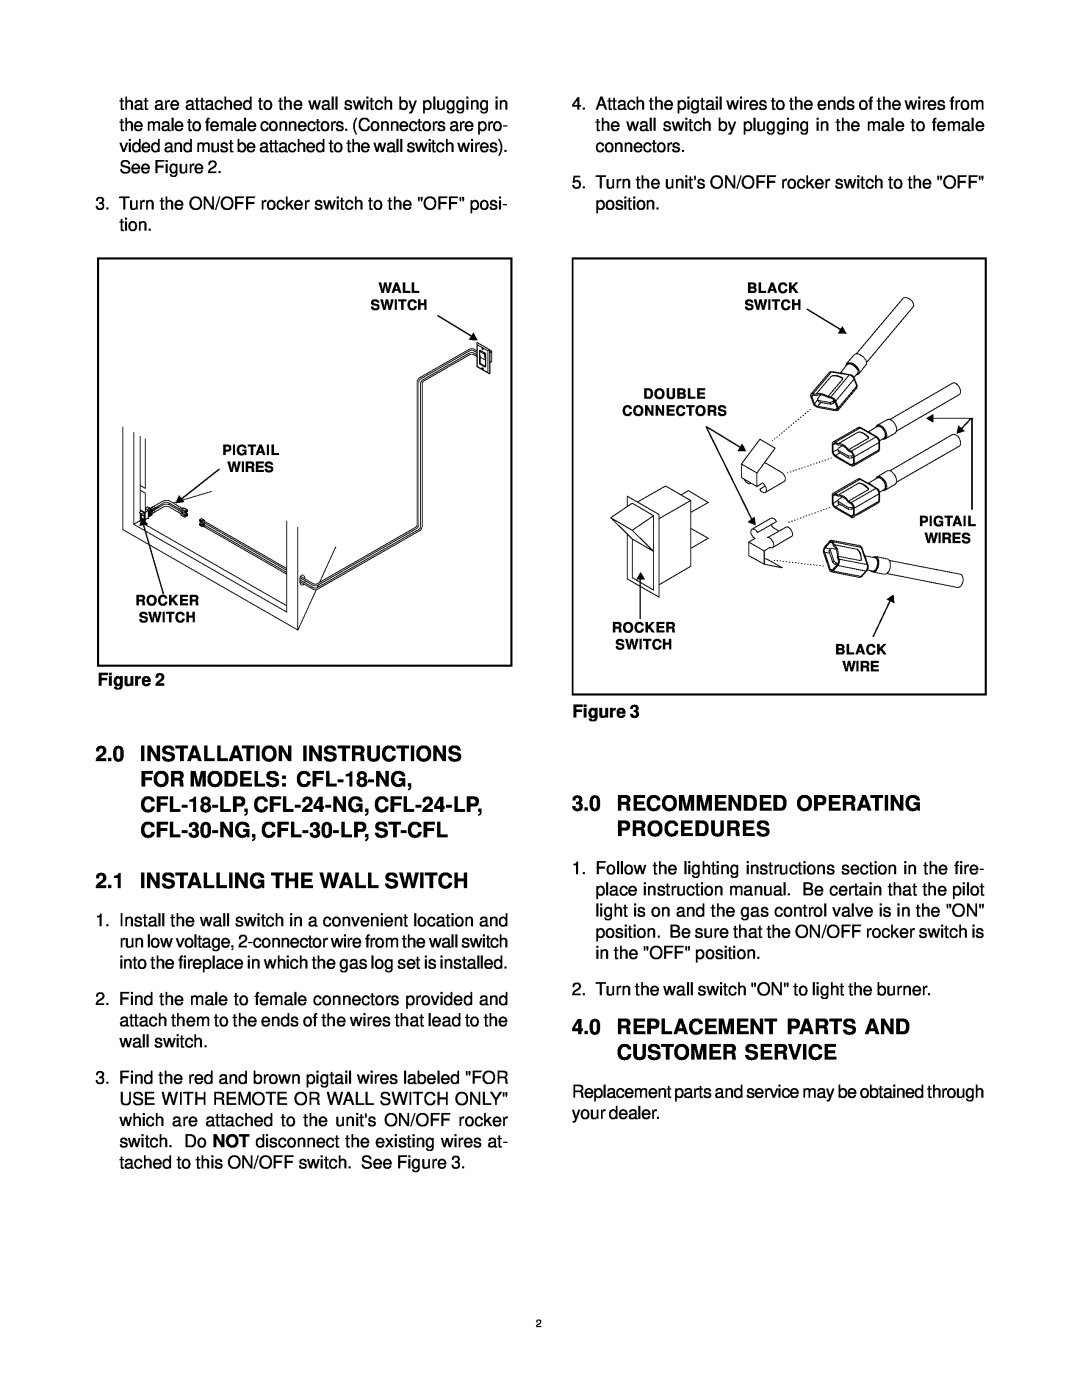 Hearth and Home Technologies WSK-21 installation instructions Installing The Wall Switch, Recommended Operating Procedures 